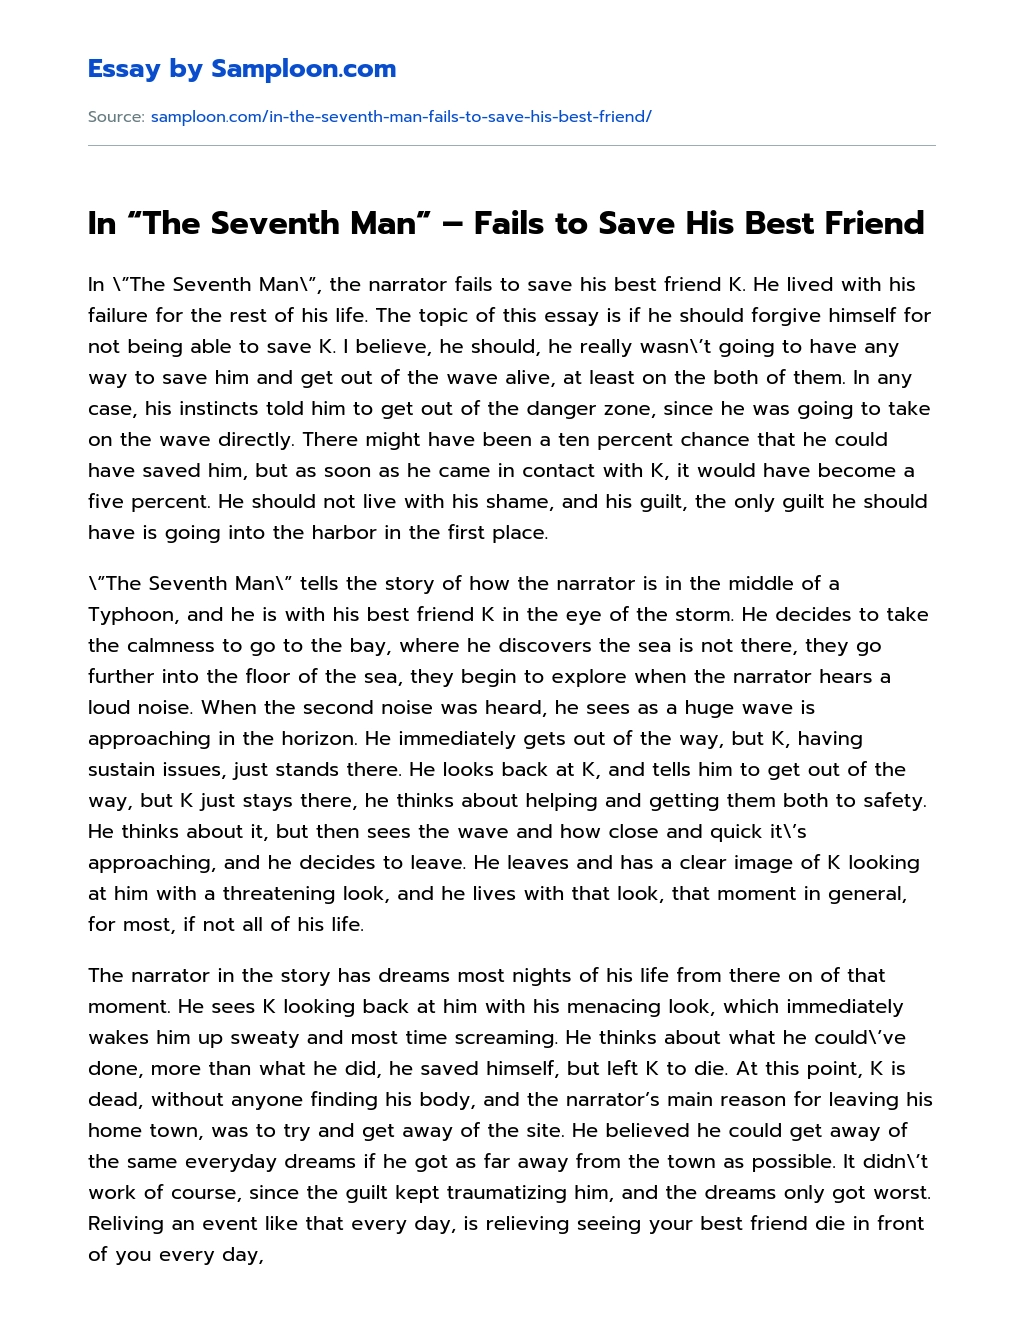 In “The Seventh Man” – Fails to Save His Best Friend essay